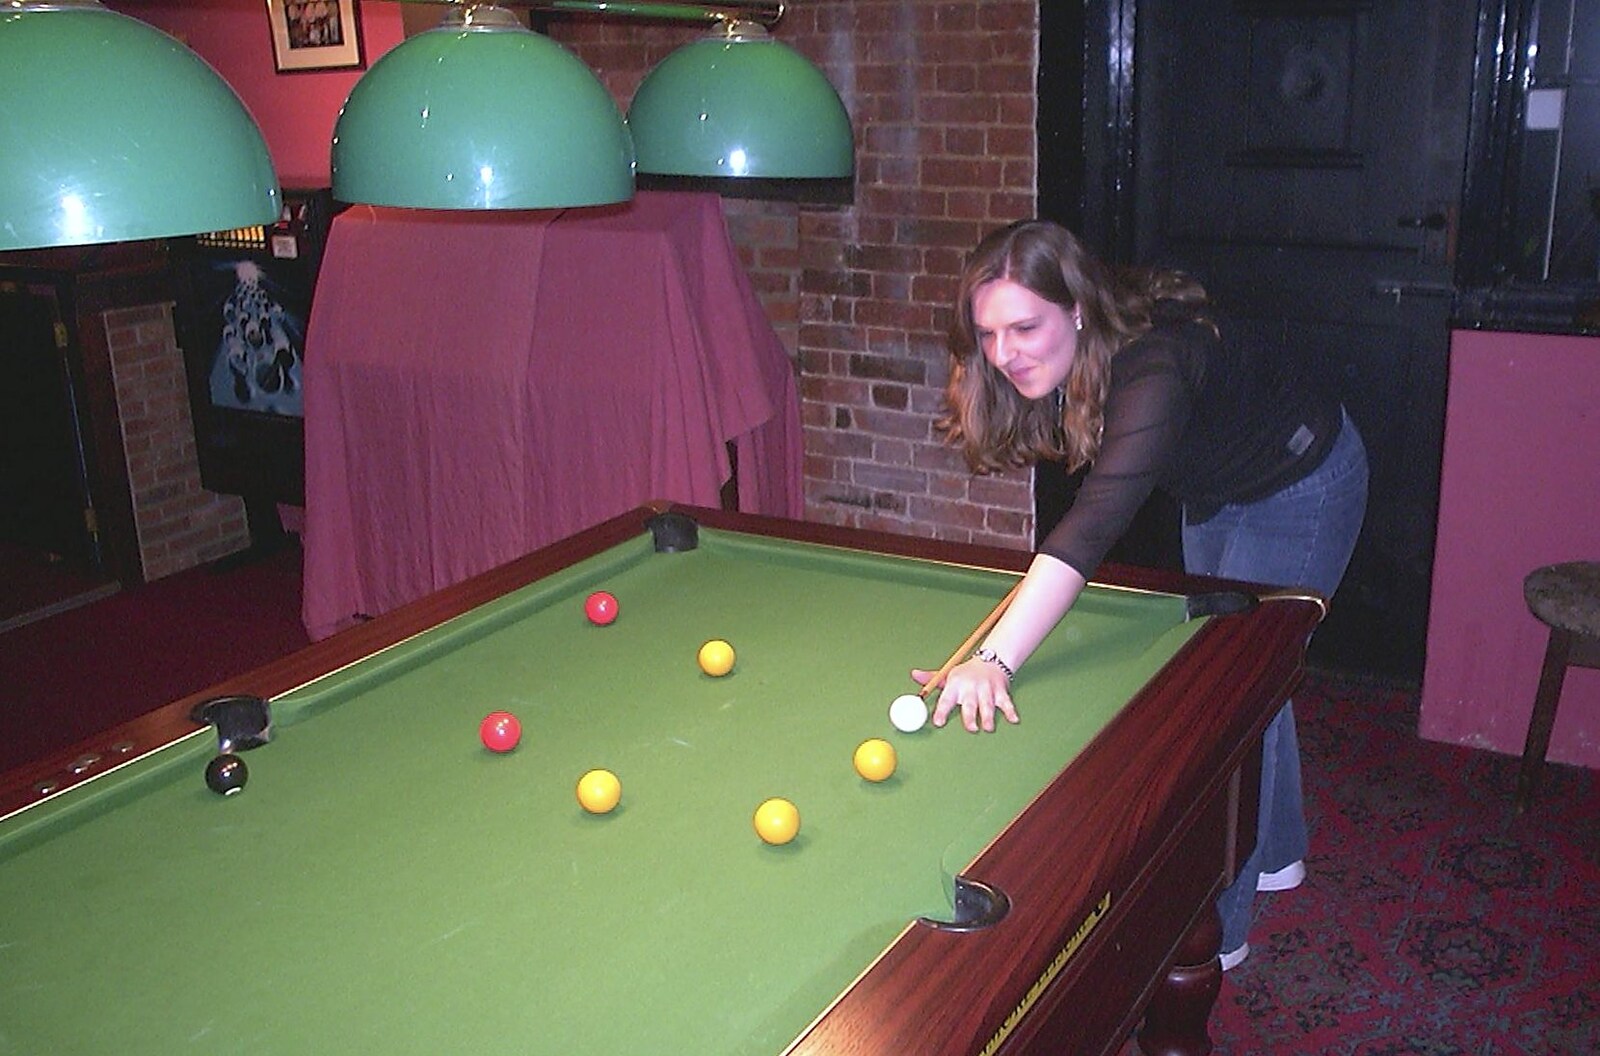 A March Miscellany: The BBs, Pulham Pubs and Broken Cars - Norfolk and Cambridgeshire, 31st March 2004: Jess plays a shot